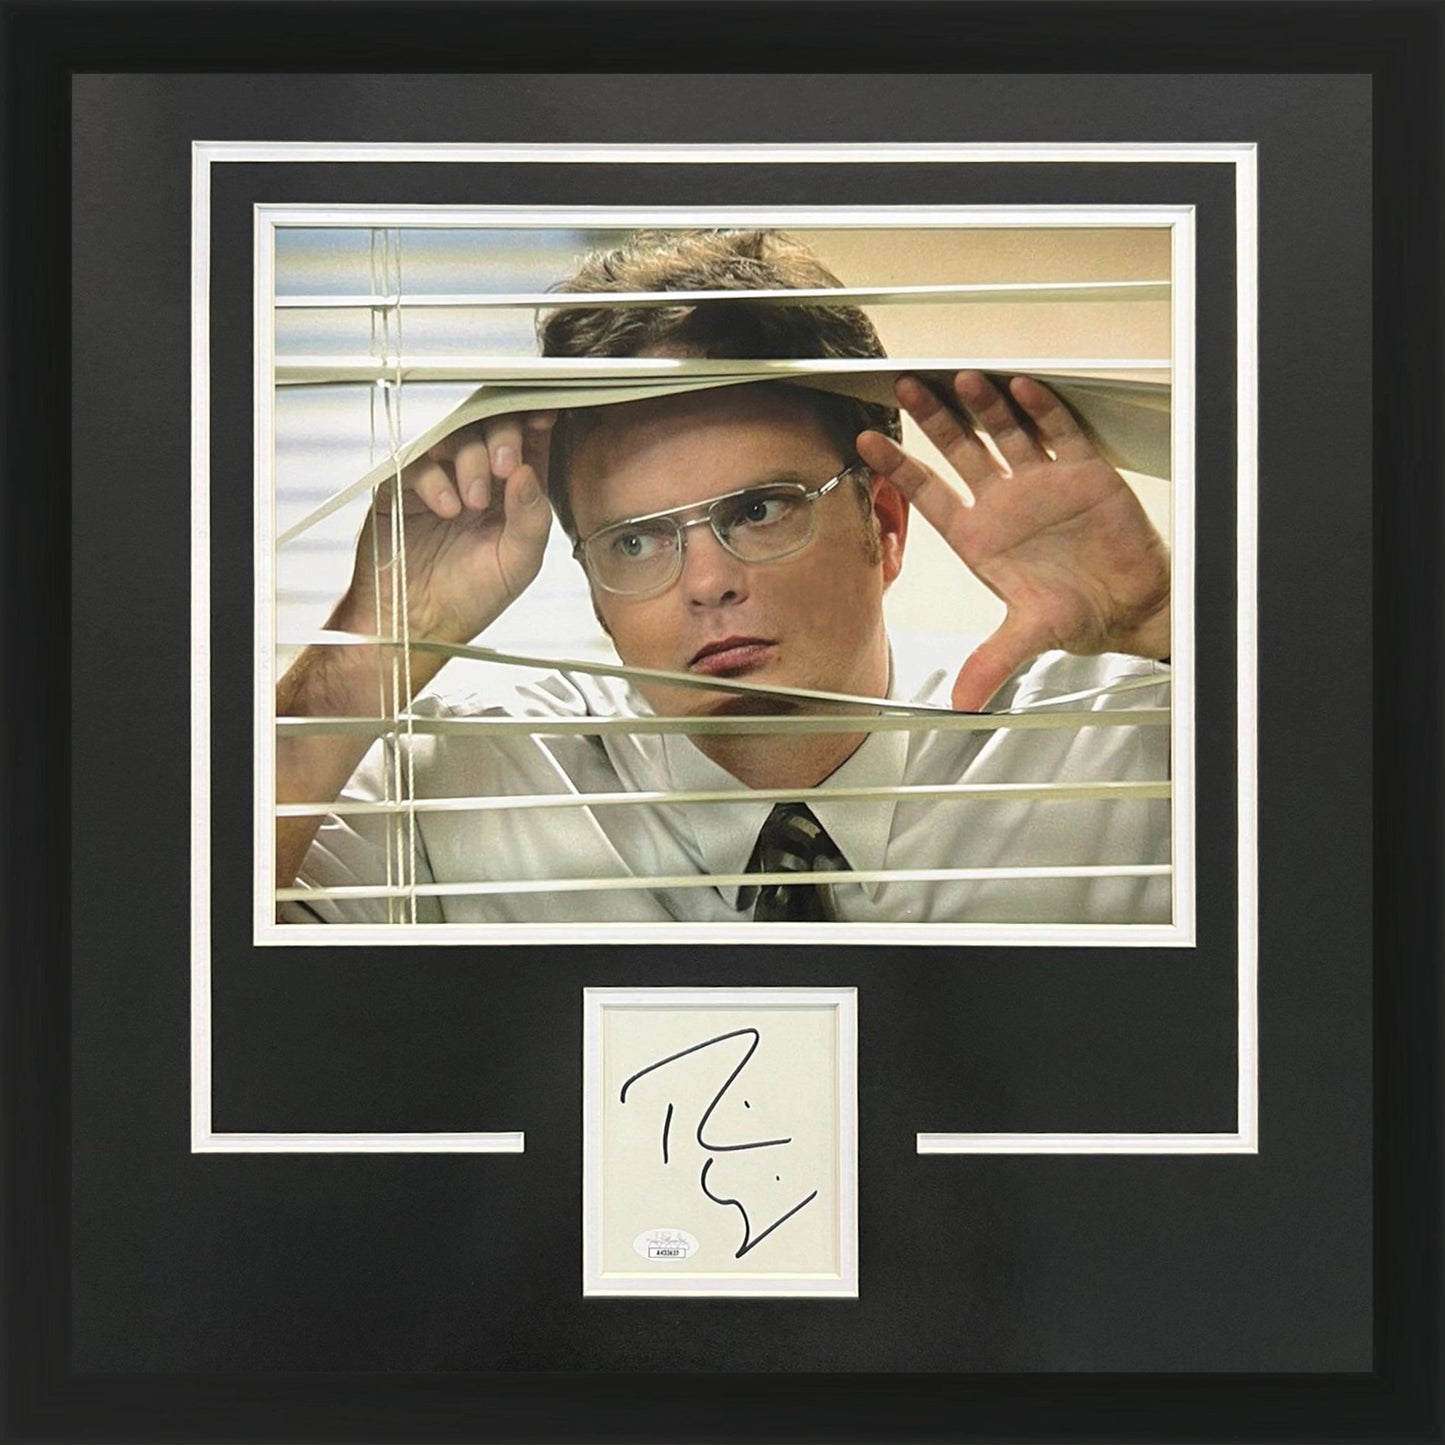 Rainn Wilson Autographed “The Office” Deluxe Framed Piece with 11x14 Poster - JSA